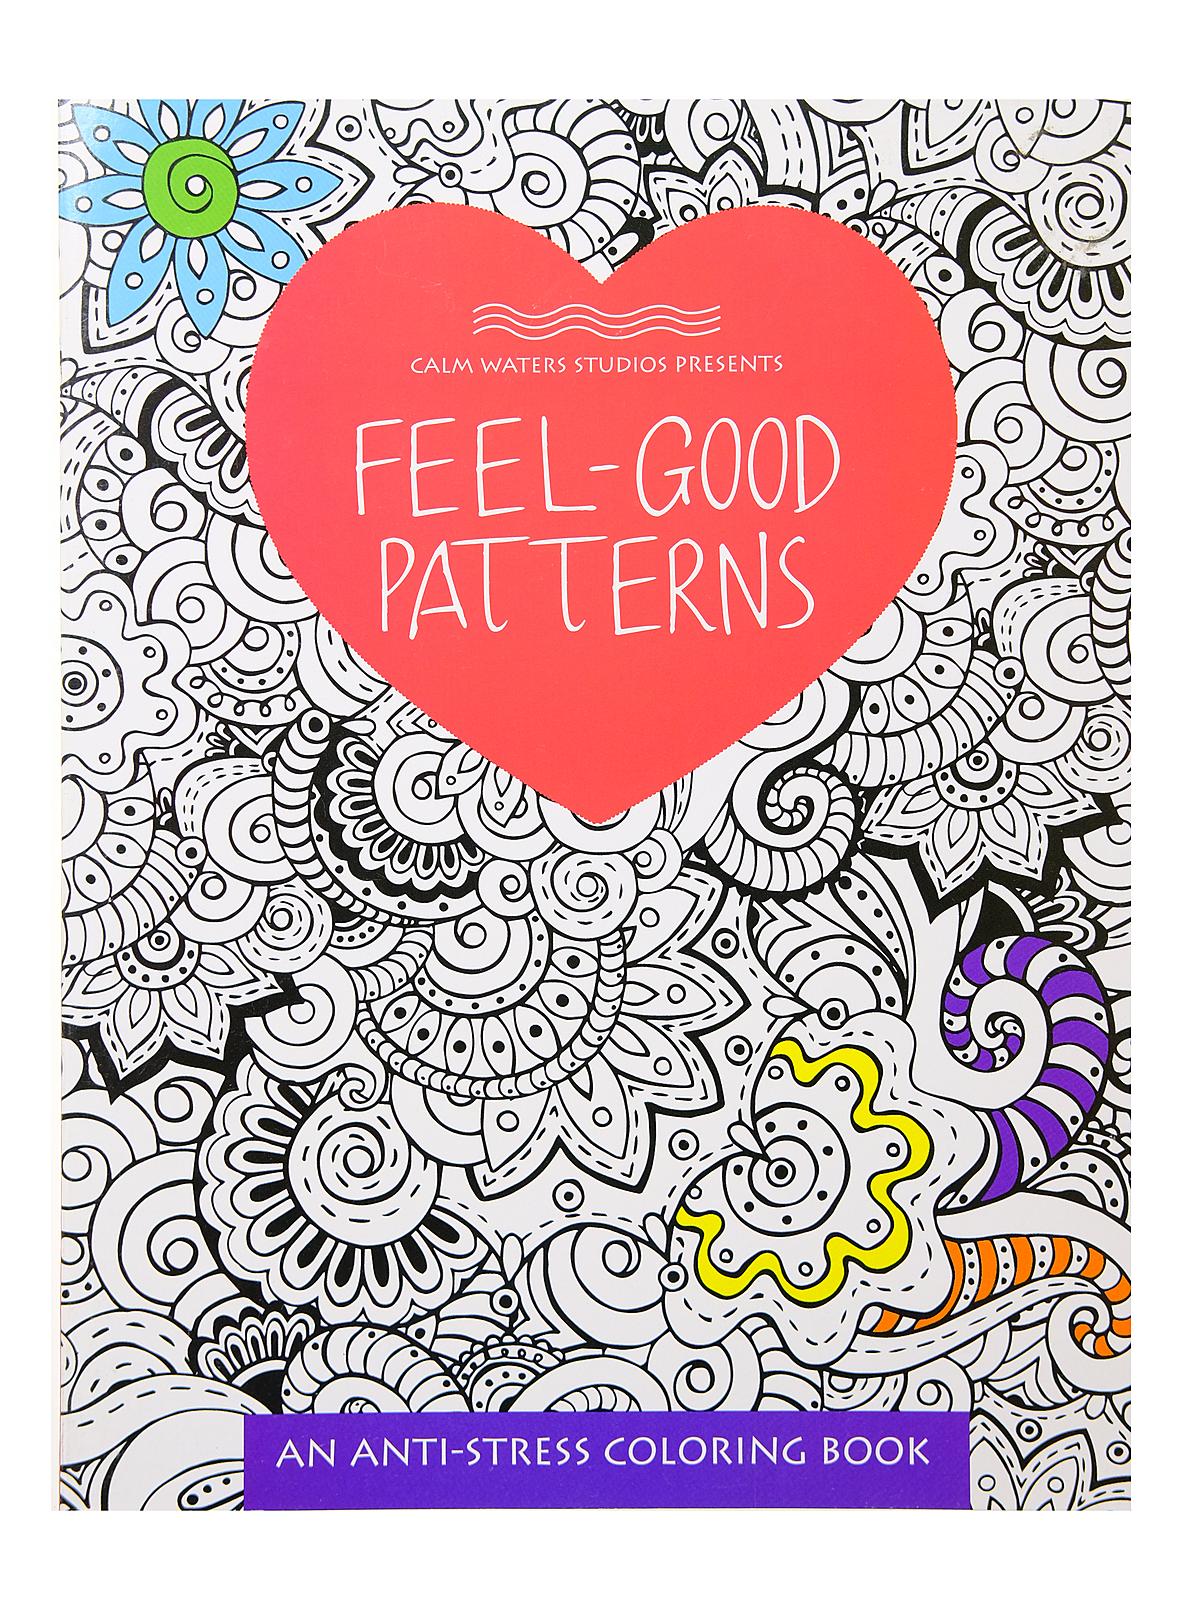 Anti-stress Coloring Book Series Feel-good Patterns